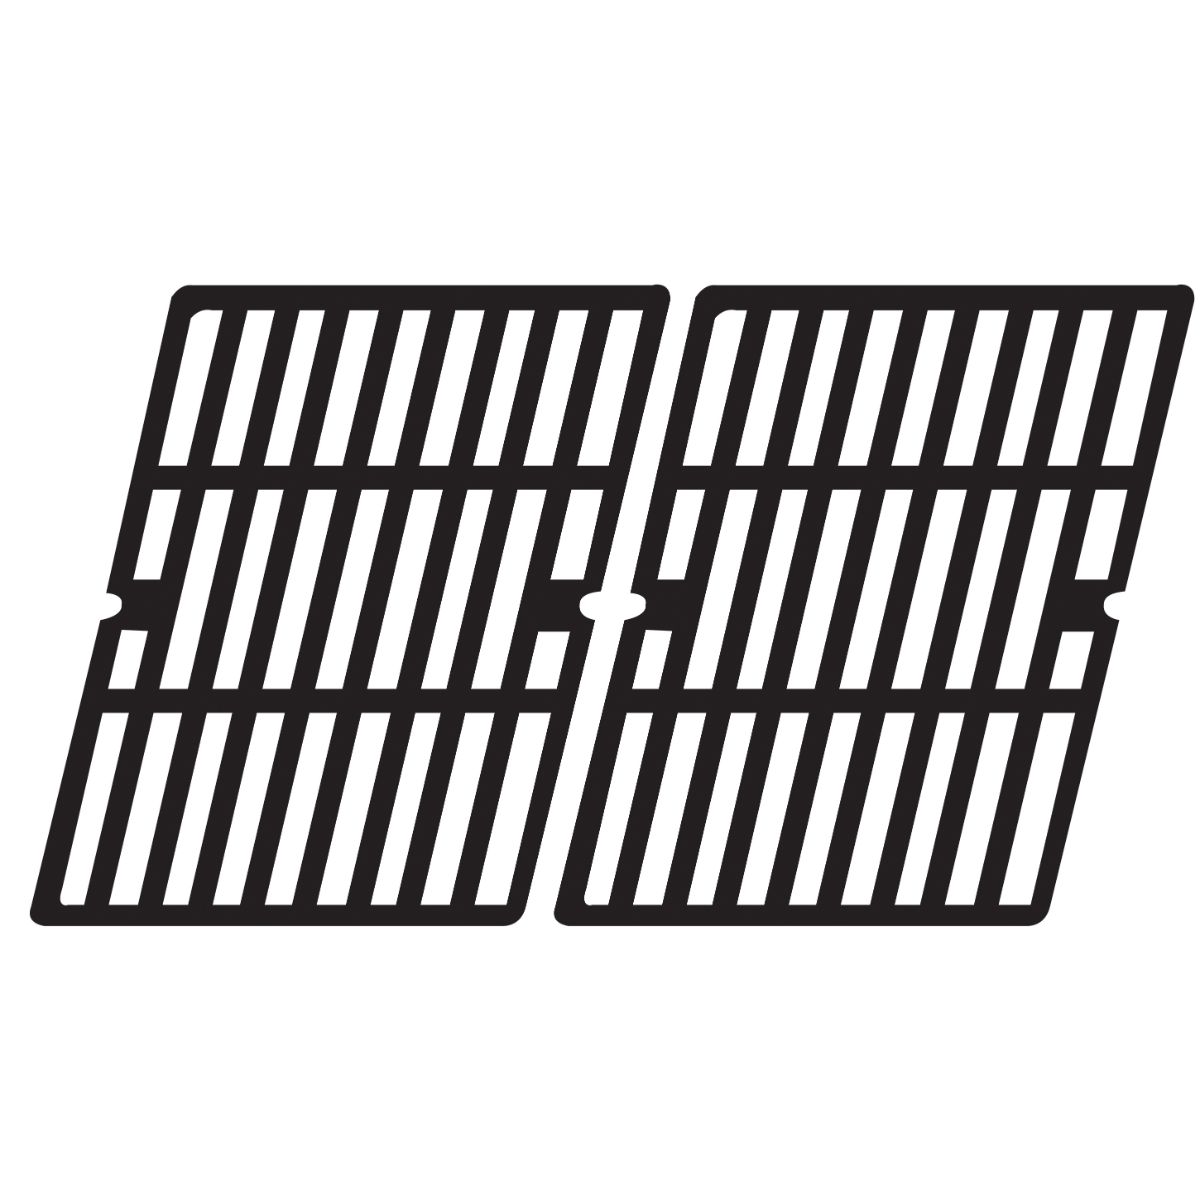 Gloss cast iron cooking grid for Grill Chef, Grill Master, Nexgrill brand gas grills